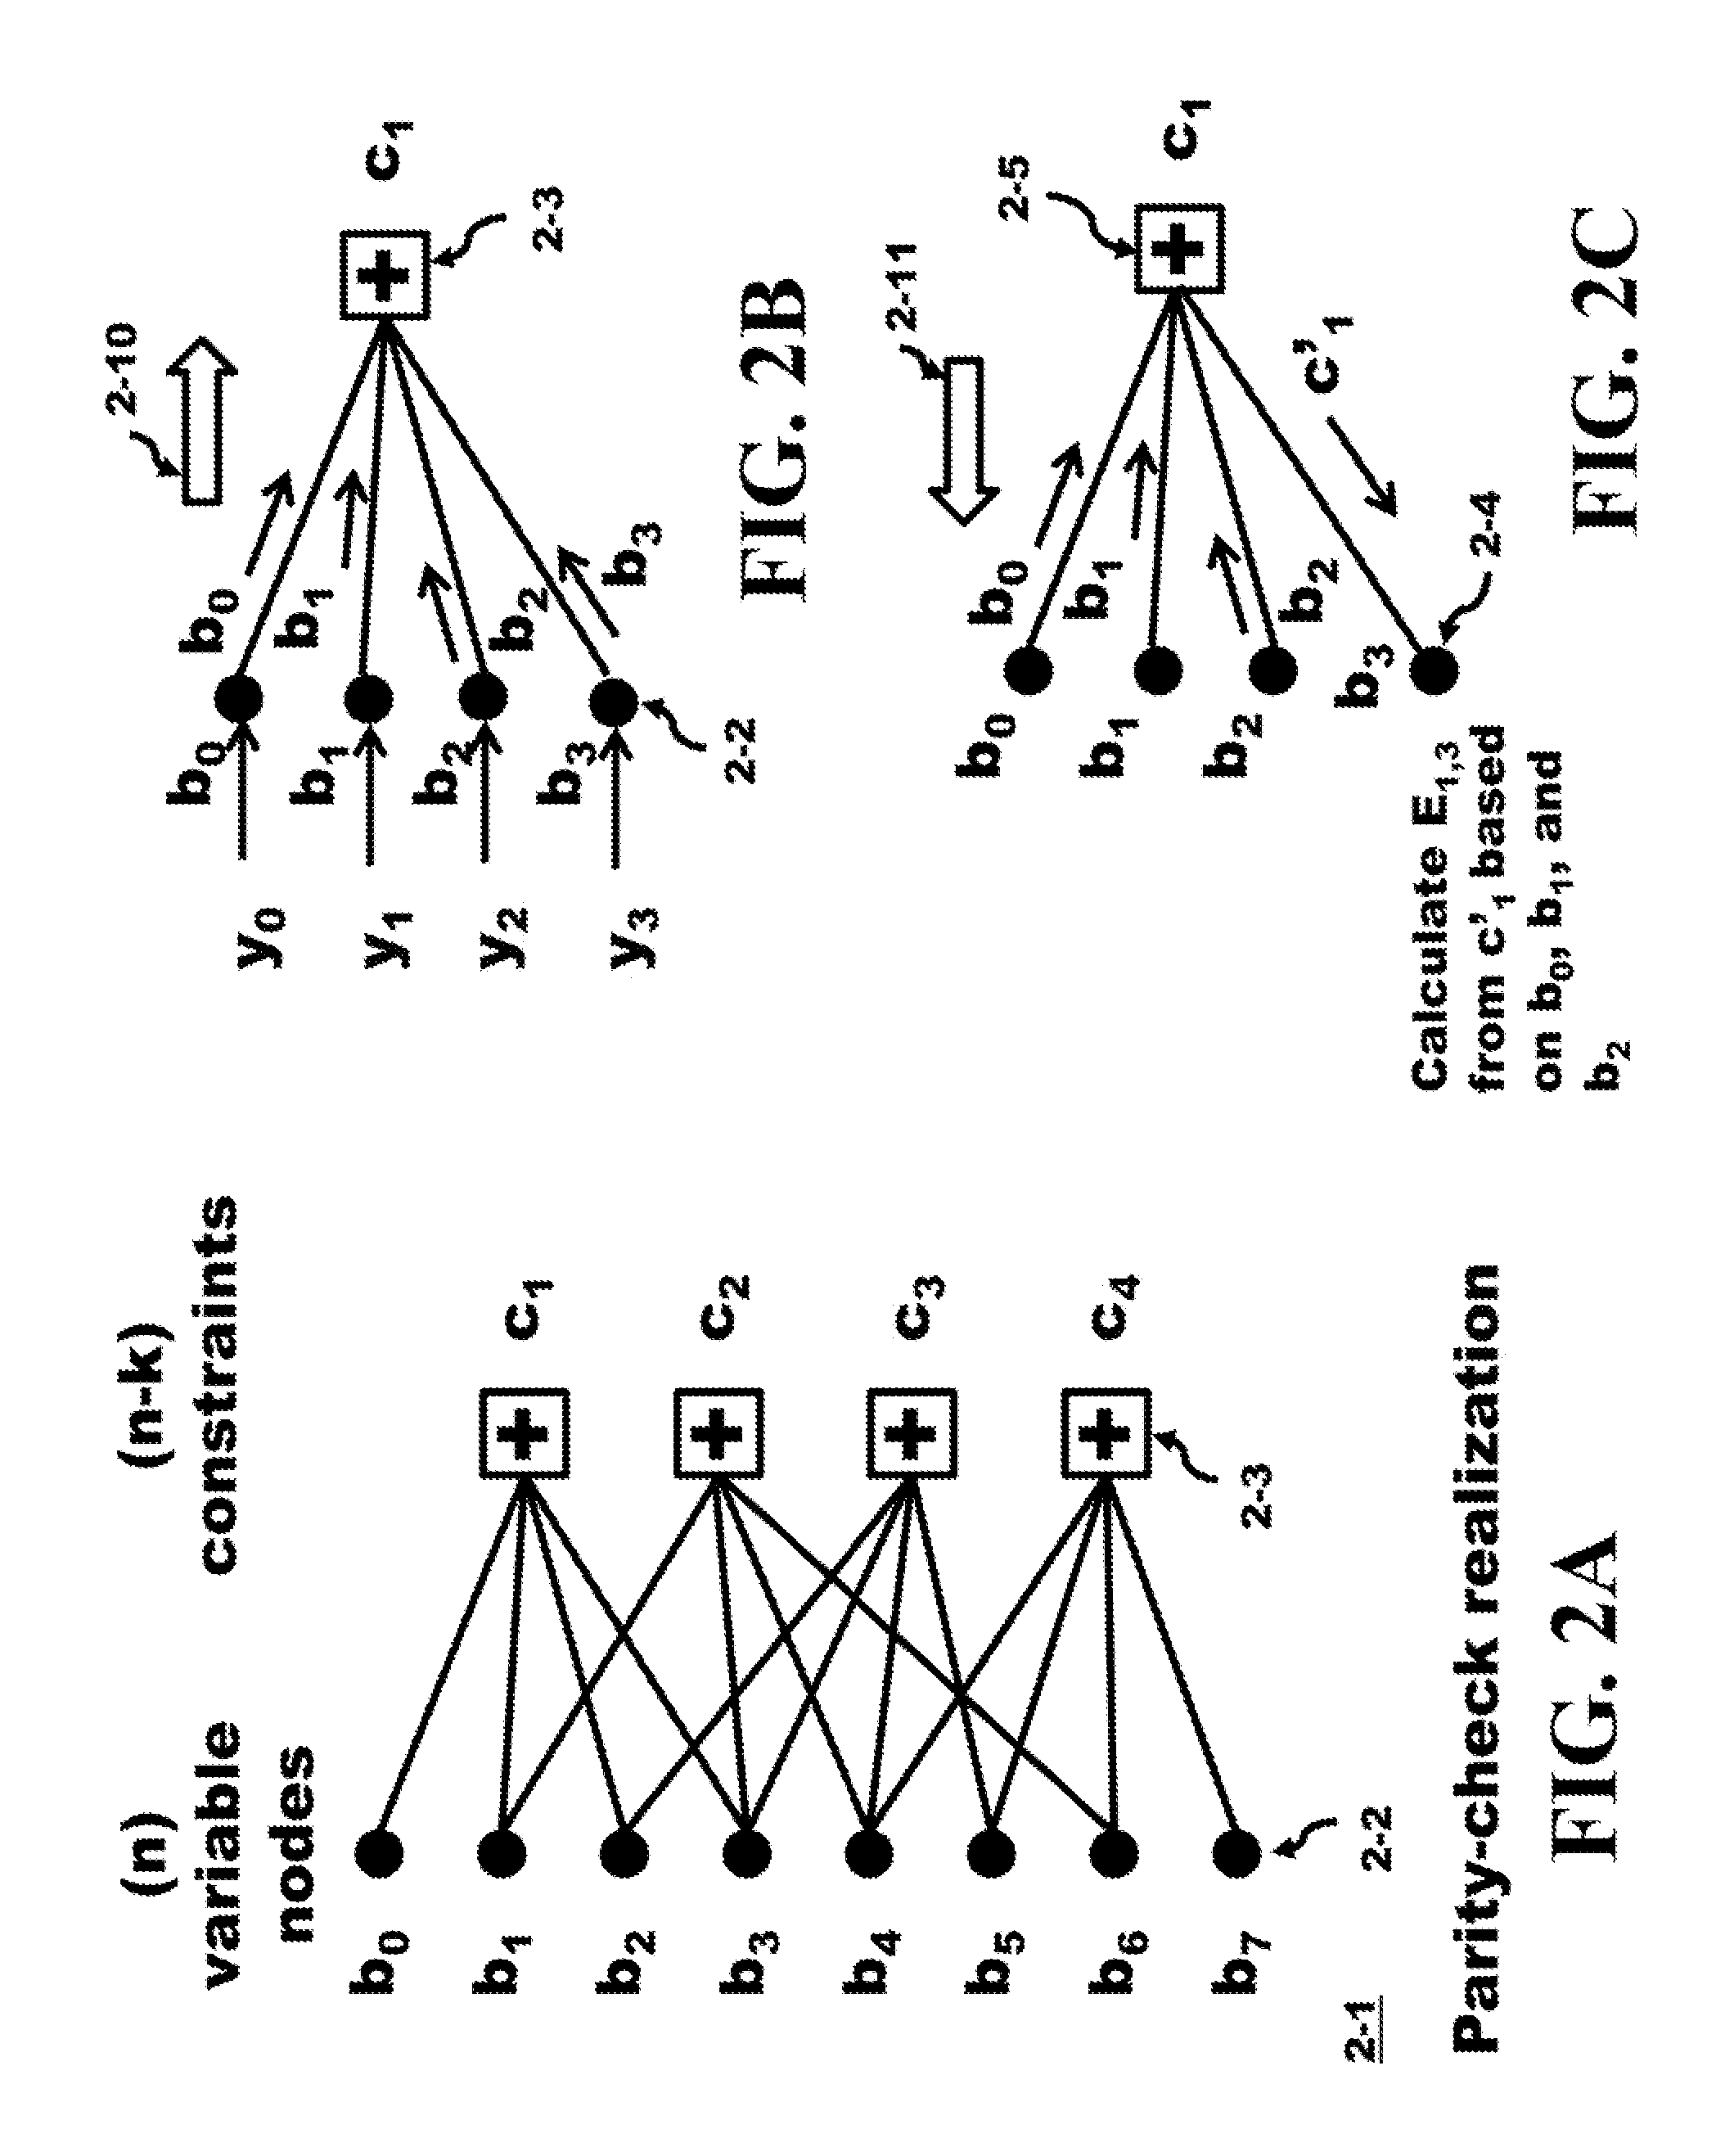 Method and Apparatus of a Fully-Pipelined Layered LDPC Decoder